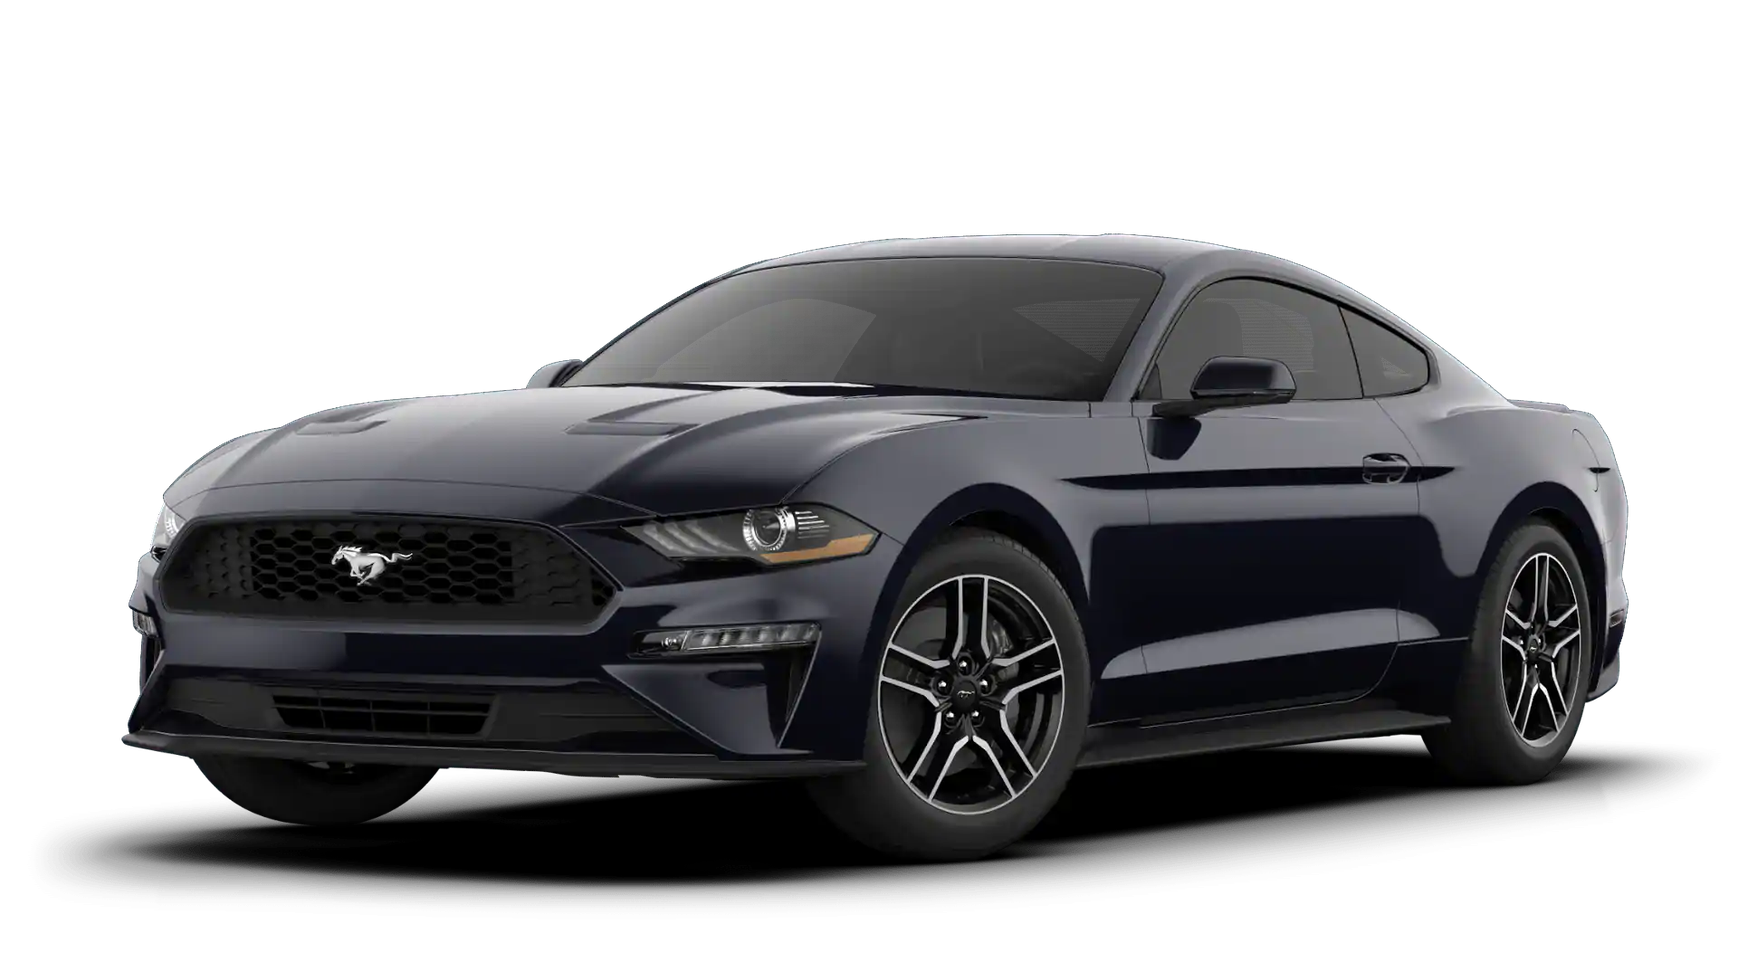 Ford Mustang EcoBoost® Premium Fastback 2020